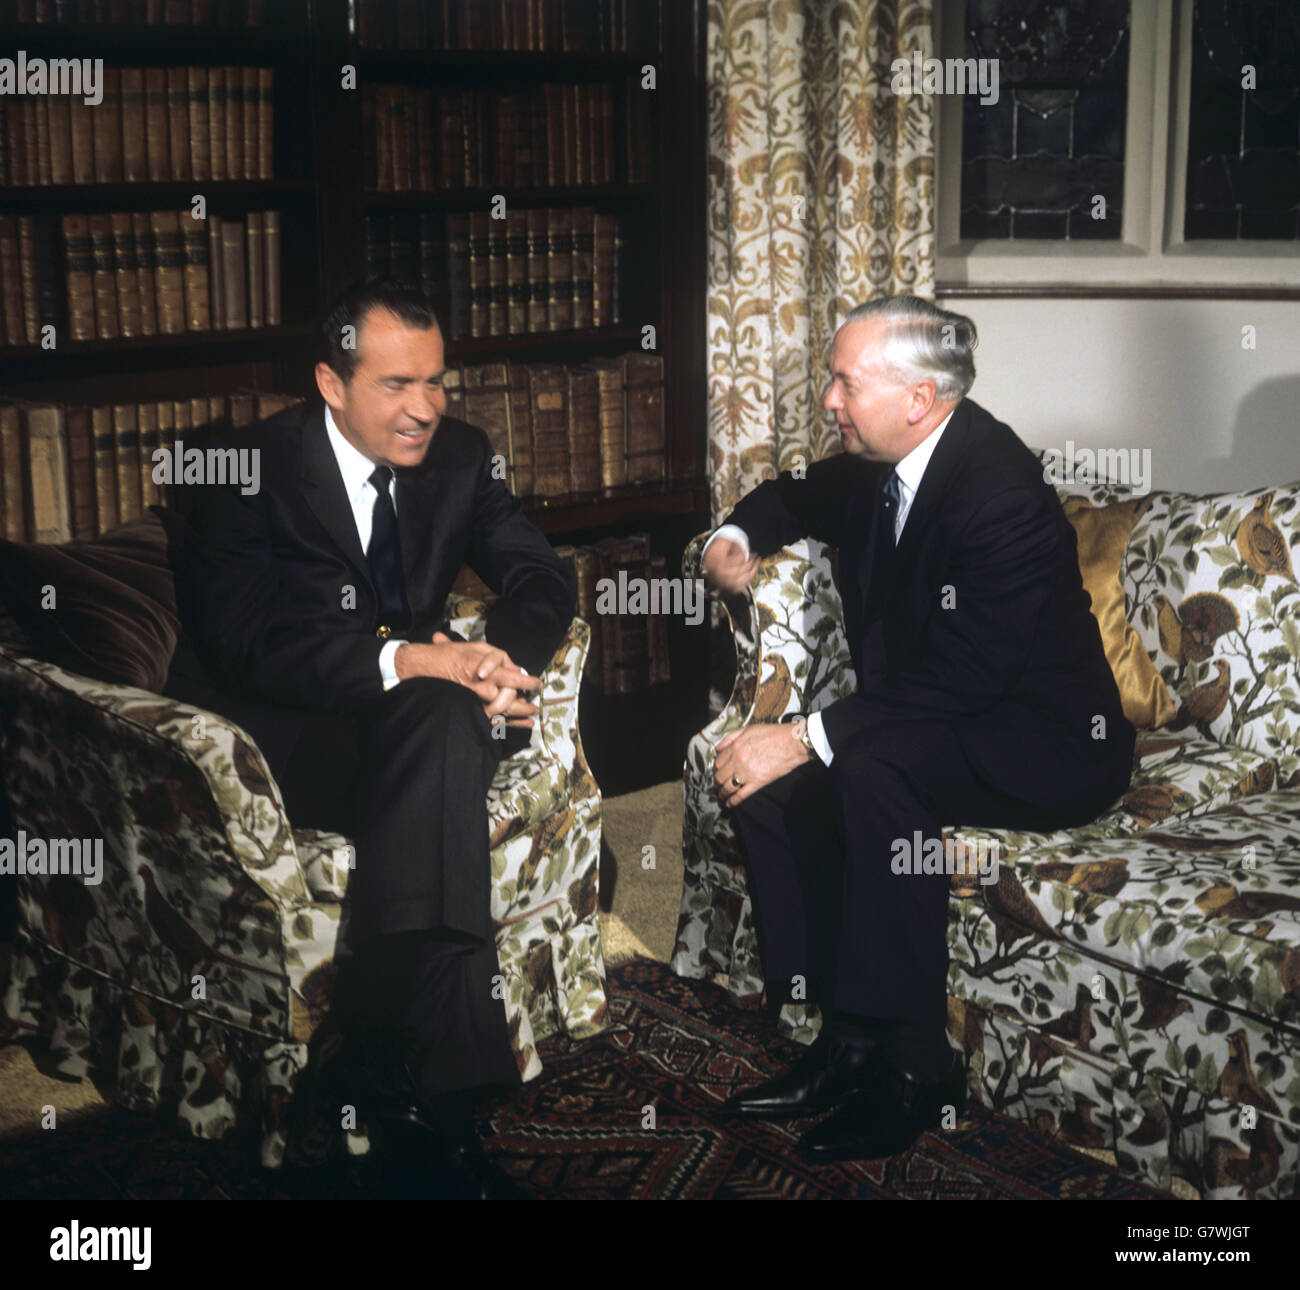 Richard Nixon, the American President, listens as Britain's Prime Minister Harold Wilson, hands clasped around his knee, talks on a seat in front of the massive fireplace in the Great Hall of Chequers, the Prime Minister's official country residence in Buckinghamshire. Mr Nixon had driven directly to Chequers from Heathrow Airport, where he arrived on his European Tour. Stock Photo